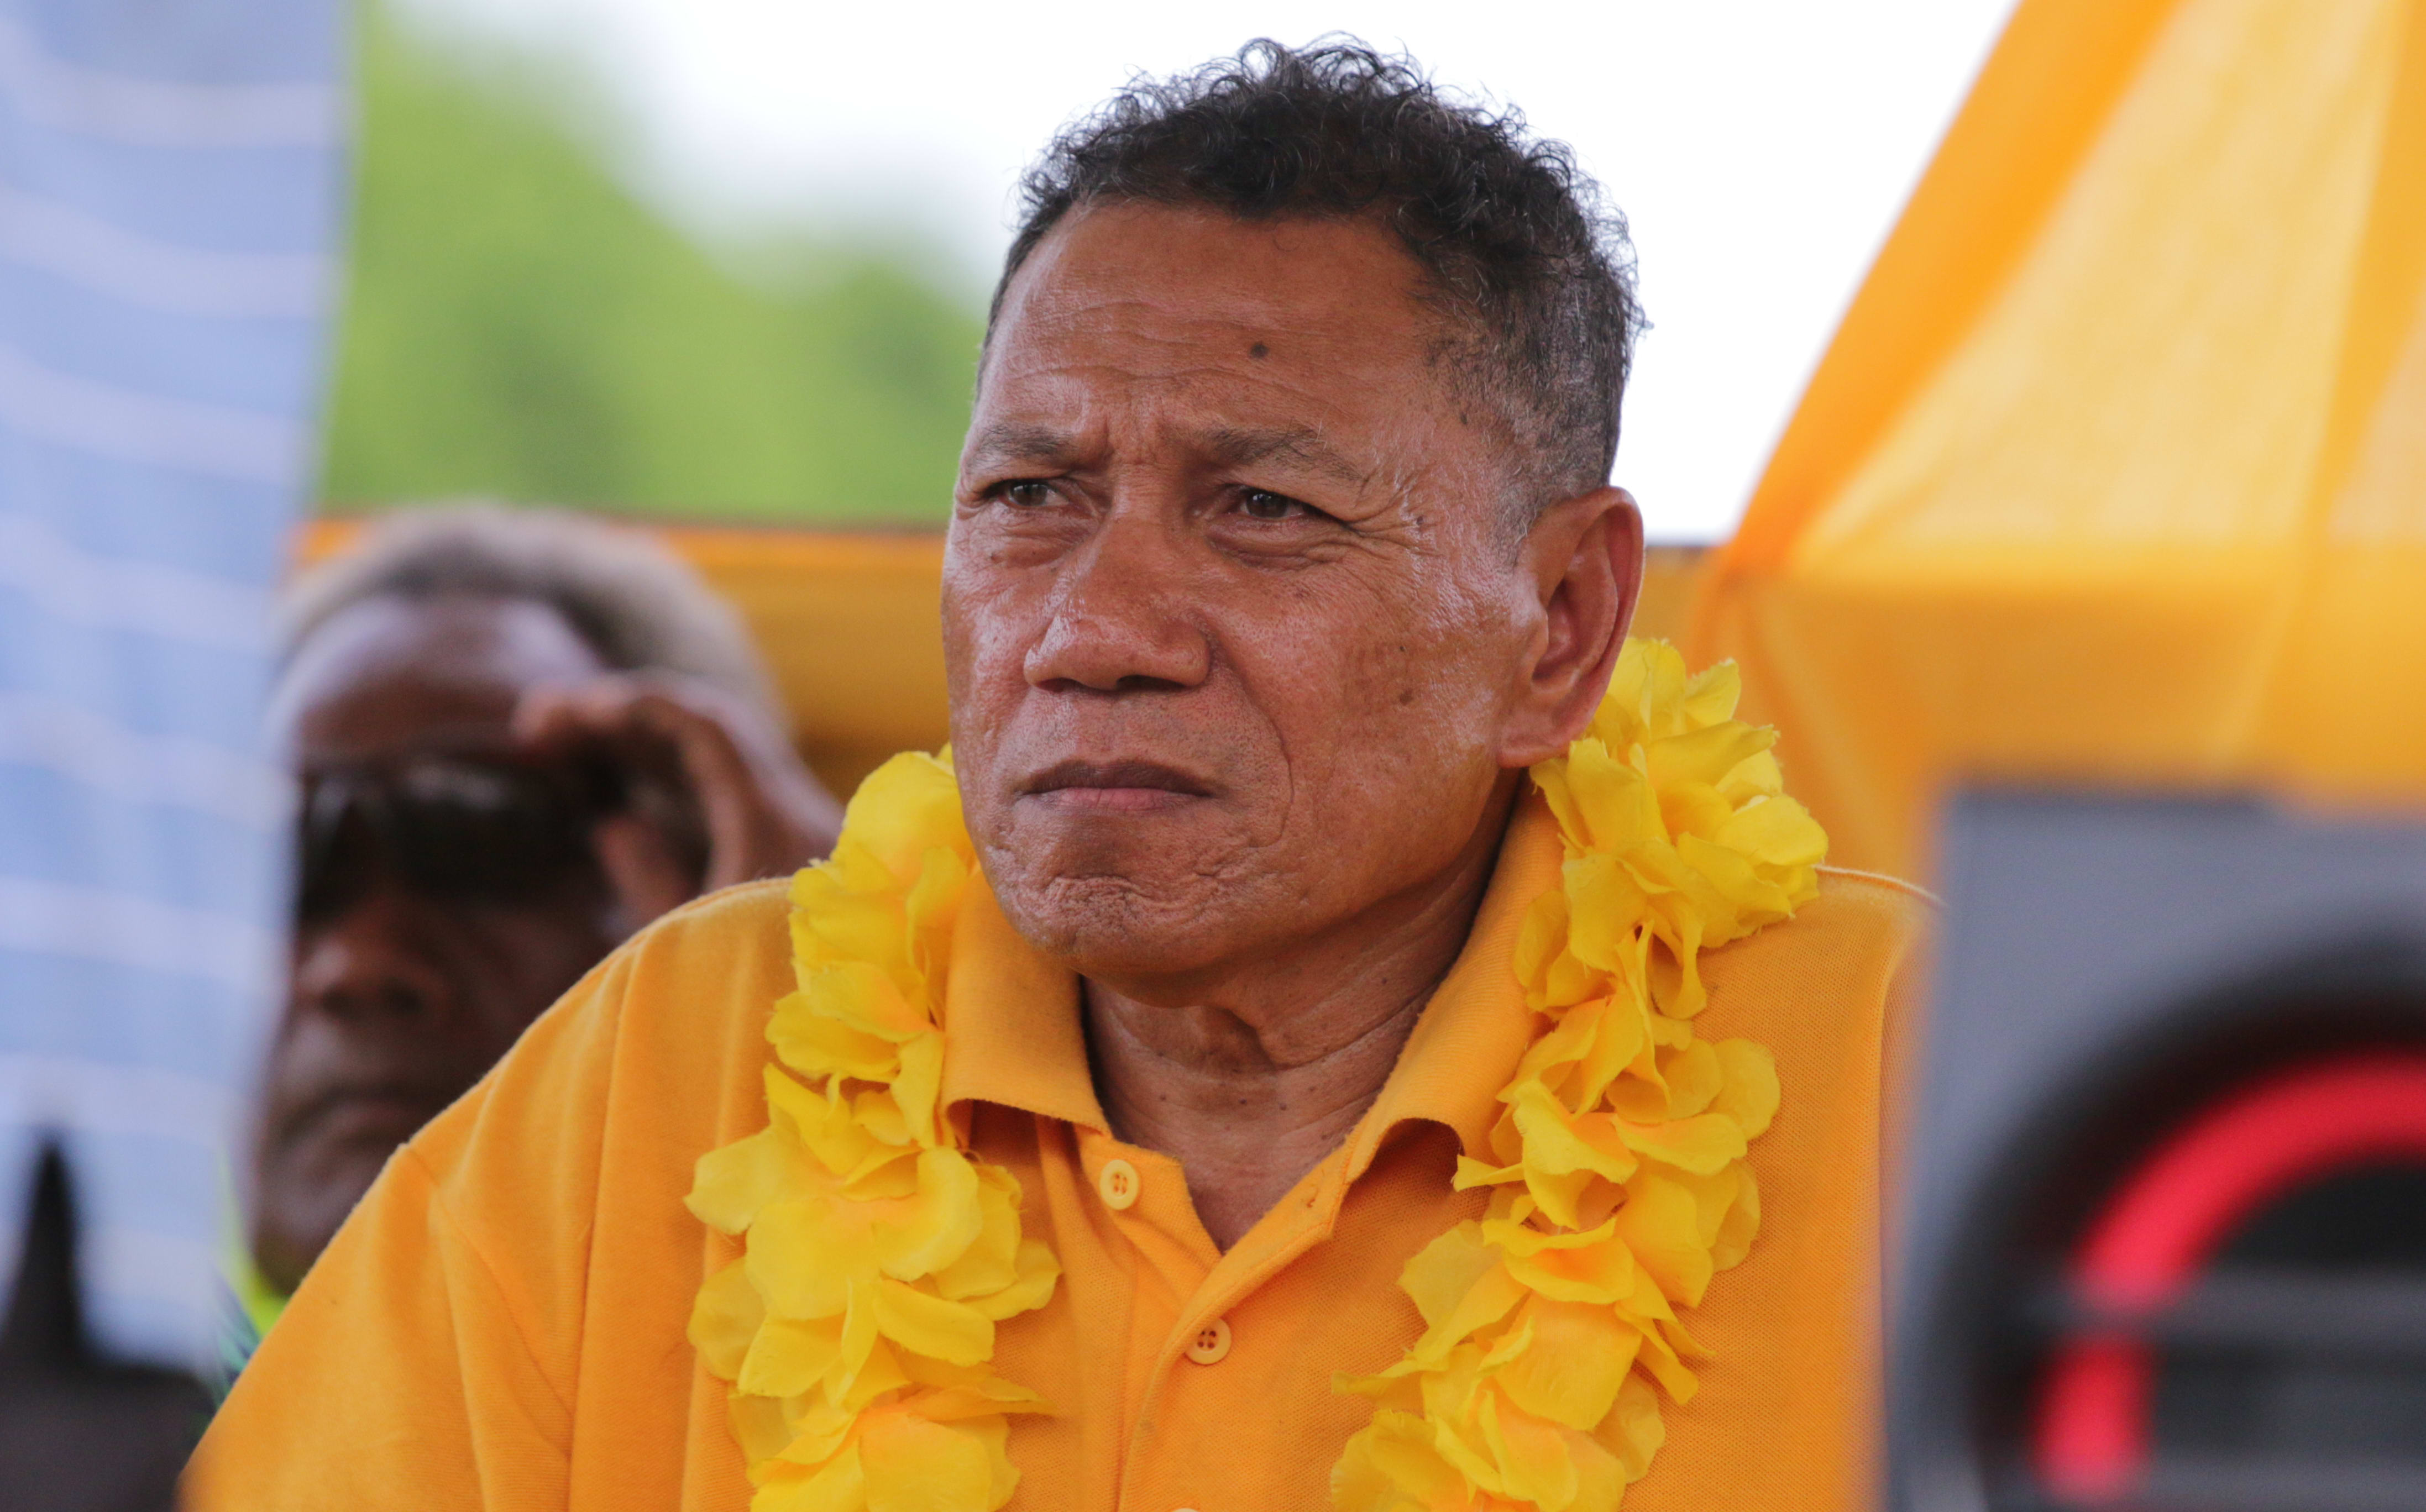 31 March 2019 - Peter Shanel Agovaka awaits his turn to speak at a political rally just days out from the election on 3 April. He was subsequently re-elected for a fourth term as MP for Central Guadalcanal.